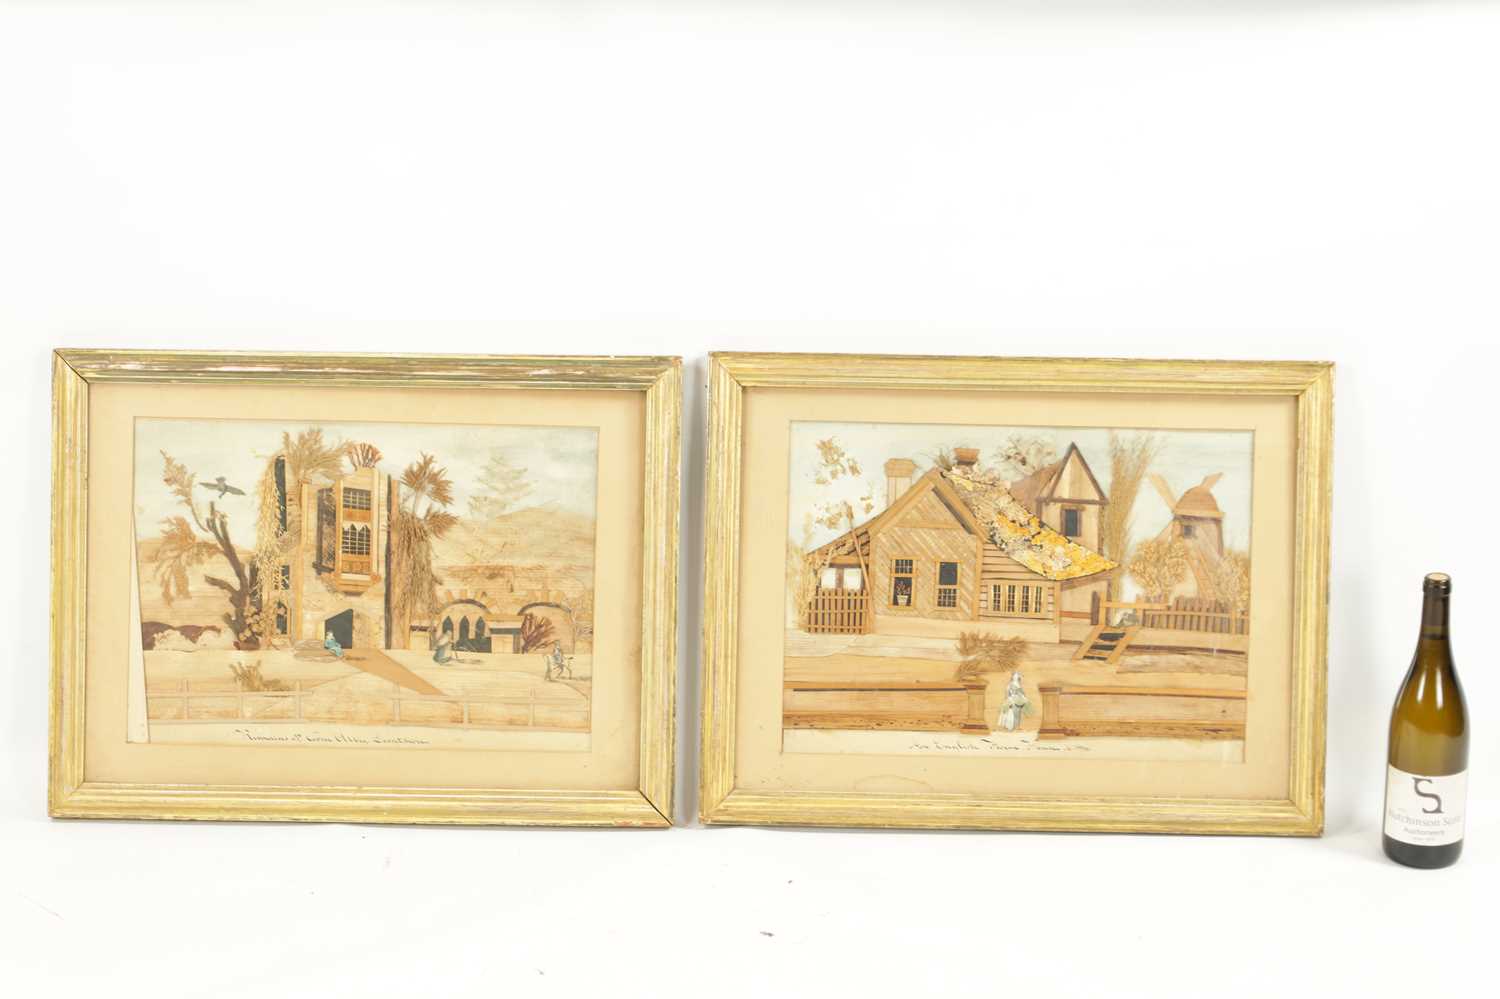 AN UNUSUAL PAIR OF 19TH CENTURY FOLK ART COLLAGES INSCRIBED ‘REMAINS OF CARNE ABBEY, DORSET’ AND ‘AN - Image 2 of 8